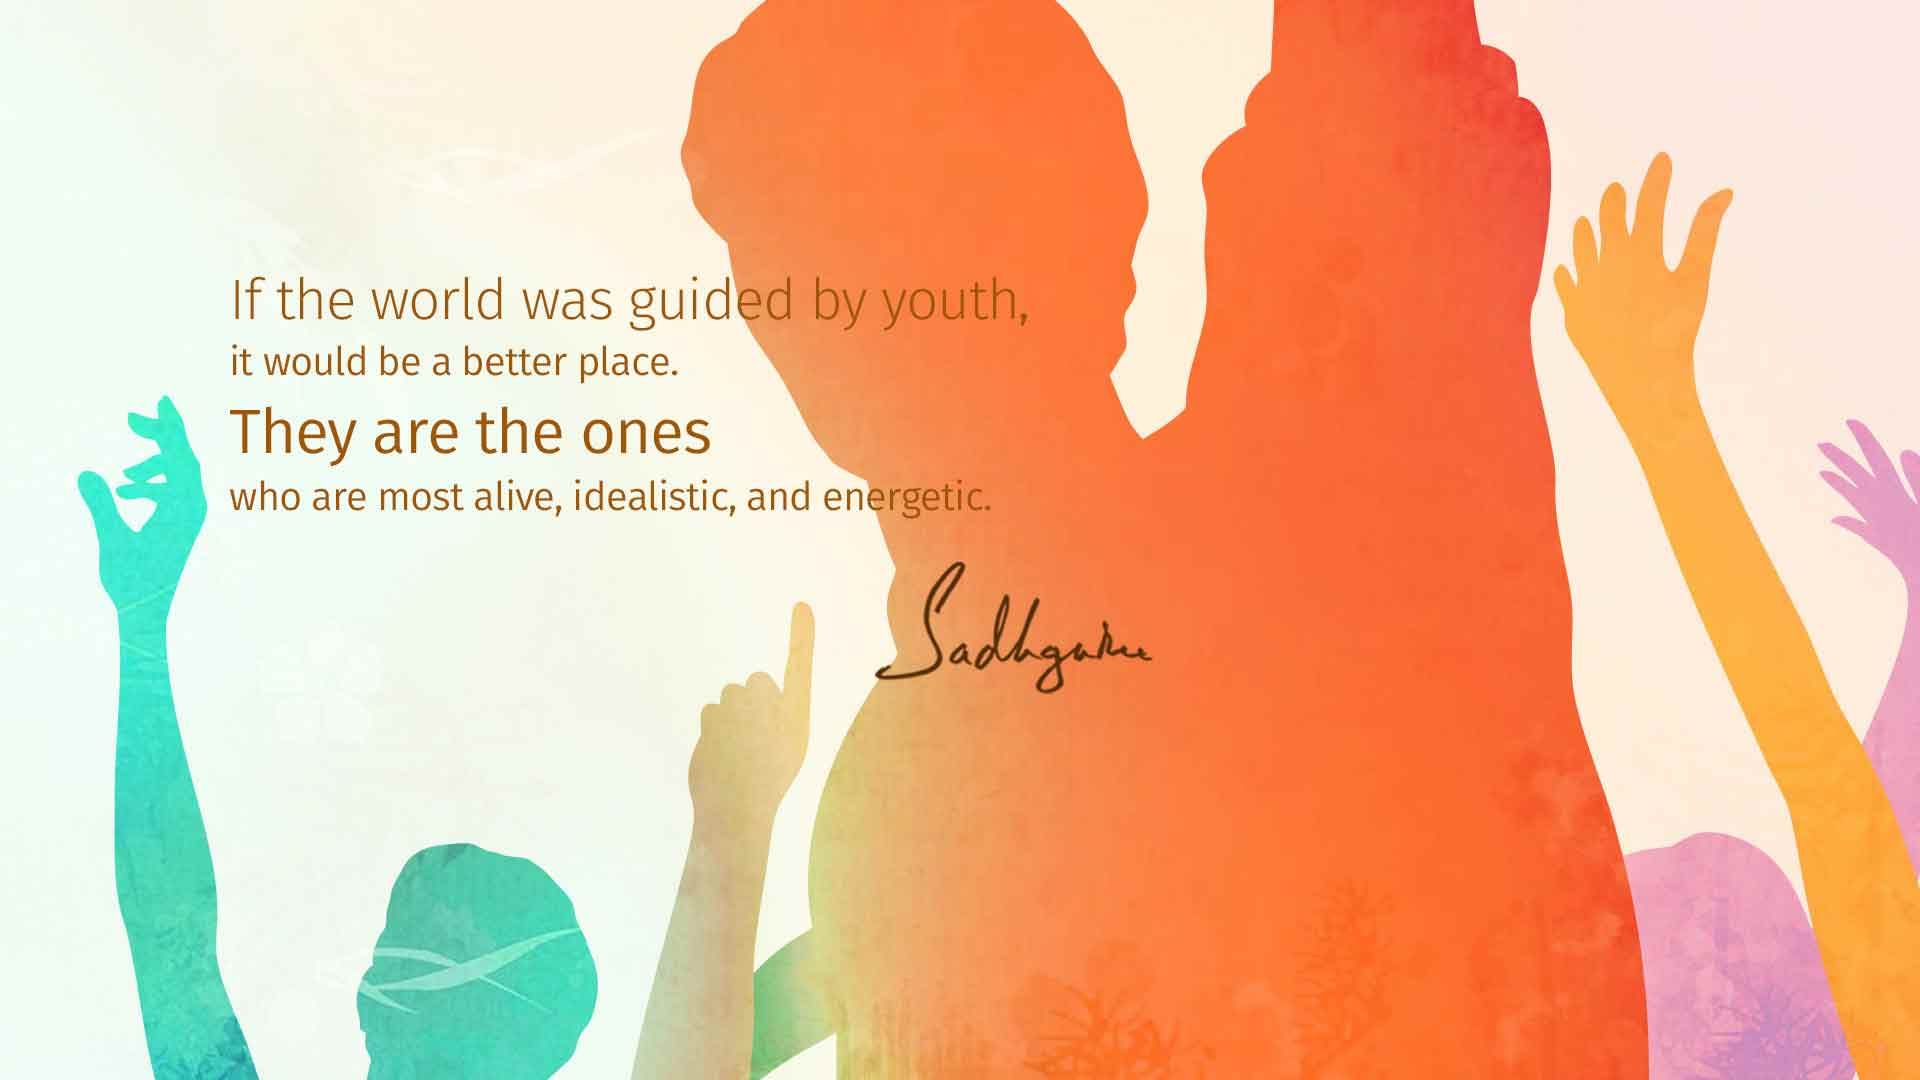 5 Sadhguru Quotes on National Youth Day